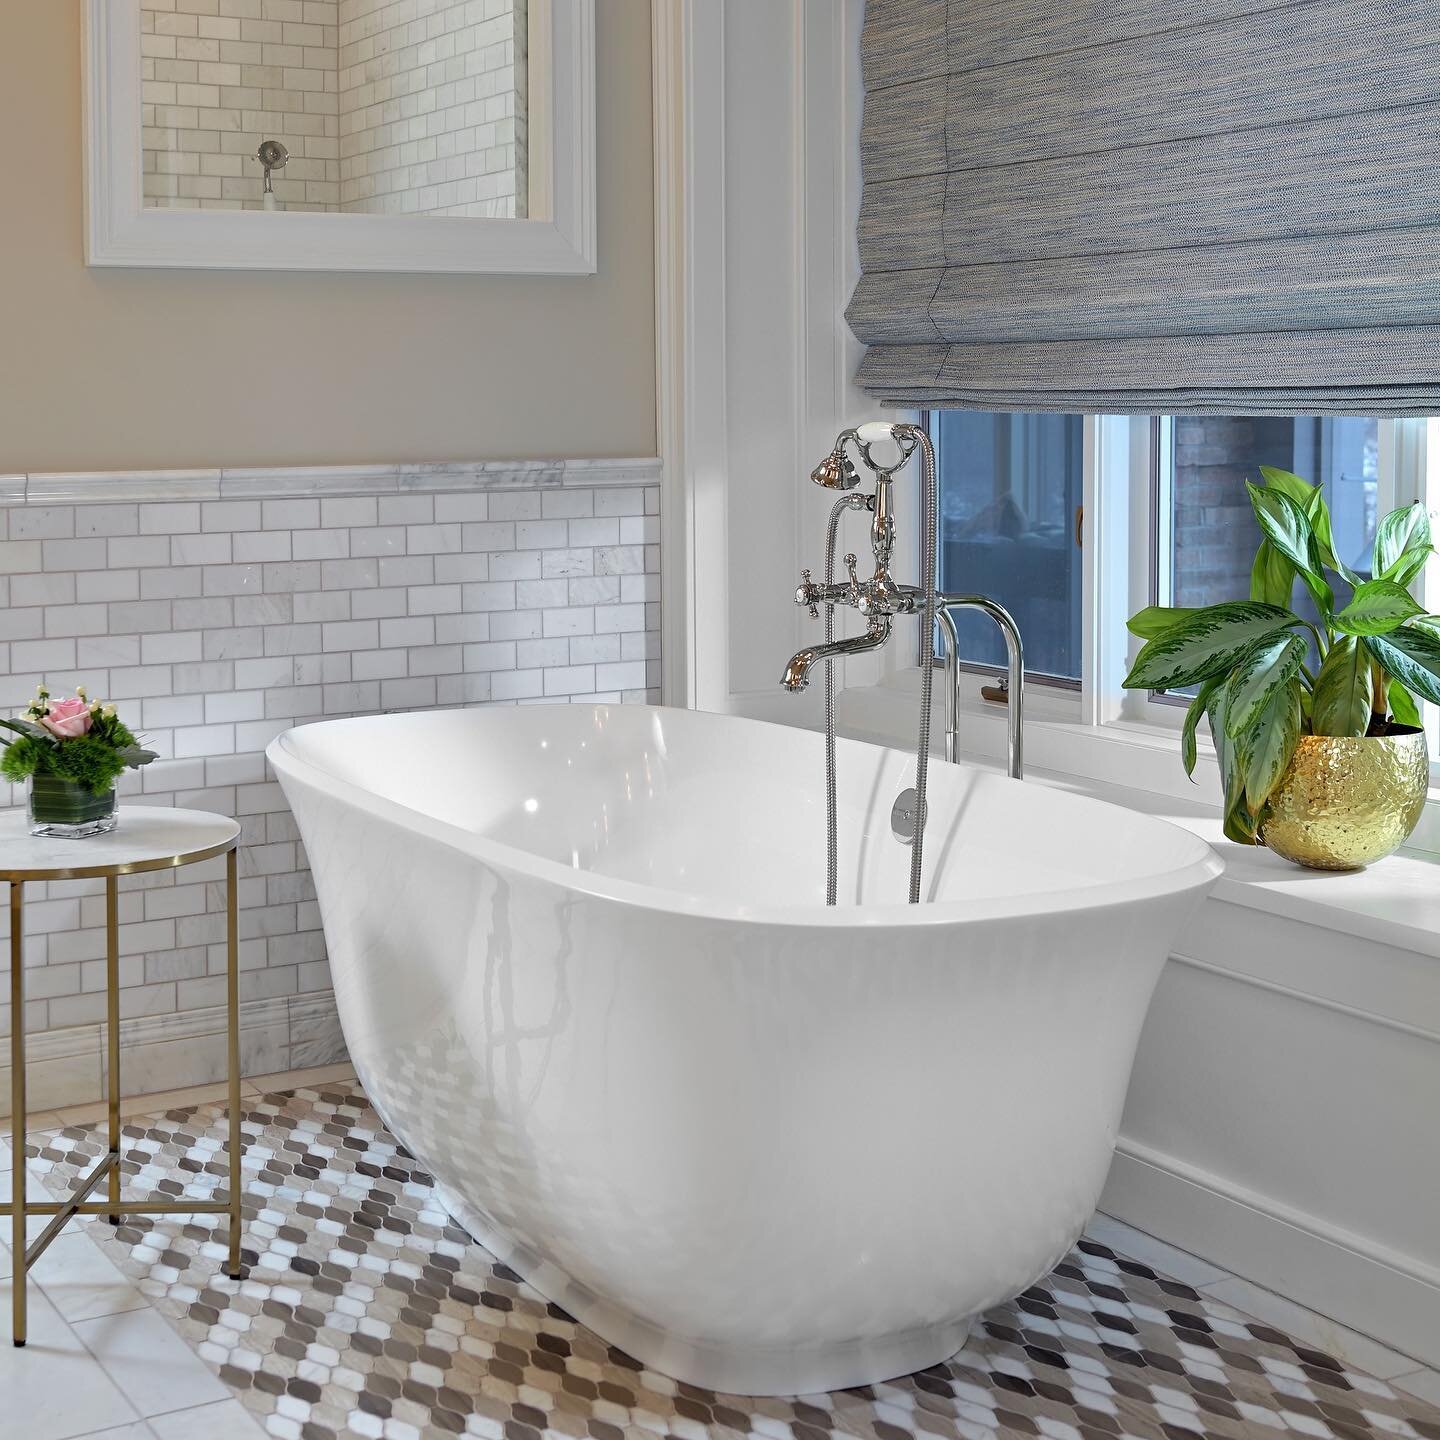 Is anyone else daydreaming about soaking in the tub with a glass of bubbly and a good book? #TGIF
.
Photo by @nicknovelli 
.
#verticalstudiodesign #verticalstudio #homedesign #designstyle #homestyle #createyourspace #chicagohomes #luxuryhomes #howiho